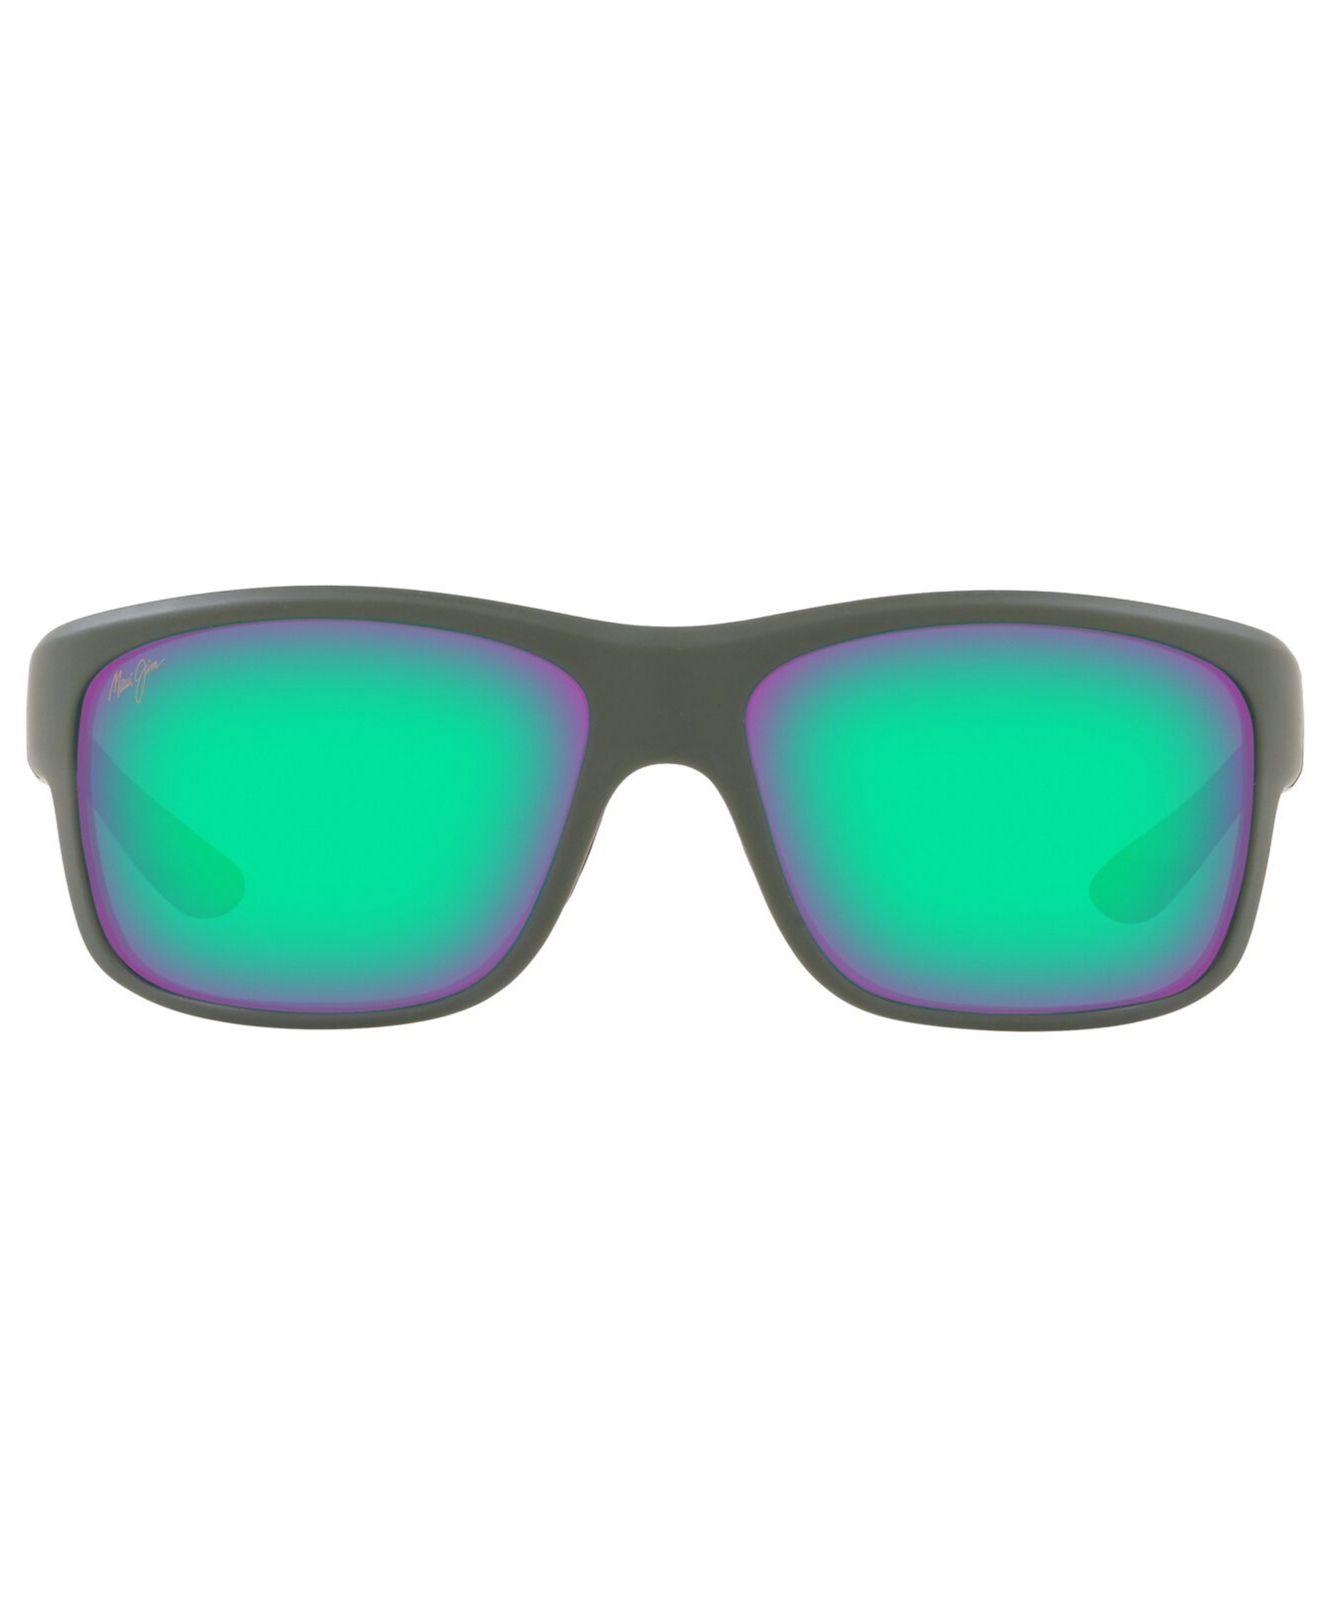 Maui Jim Southern Cross Polarized Sunglasses in Green for Men - Lyst